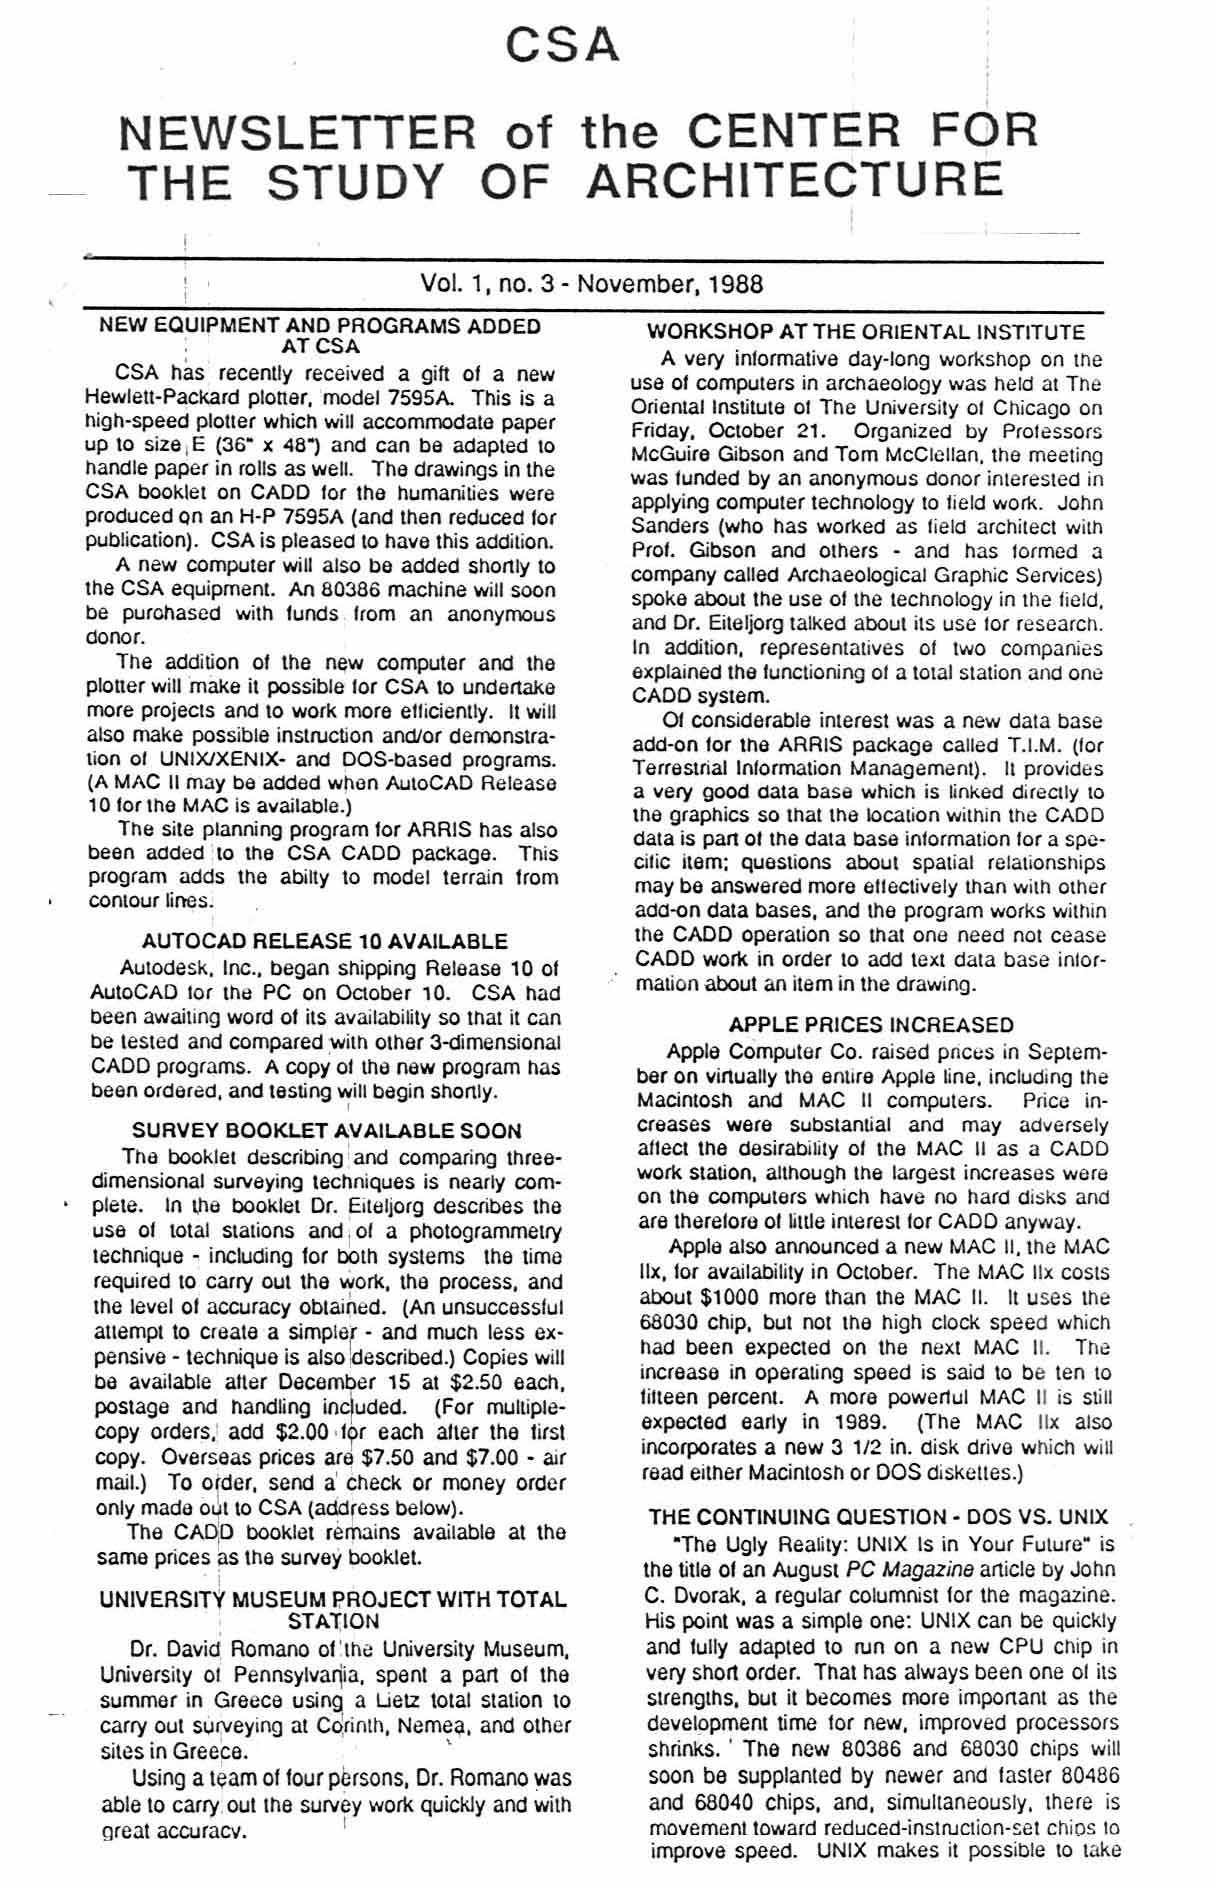 Scanned Image of Page 1, vol 1 no 3